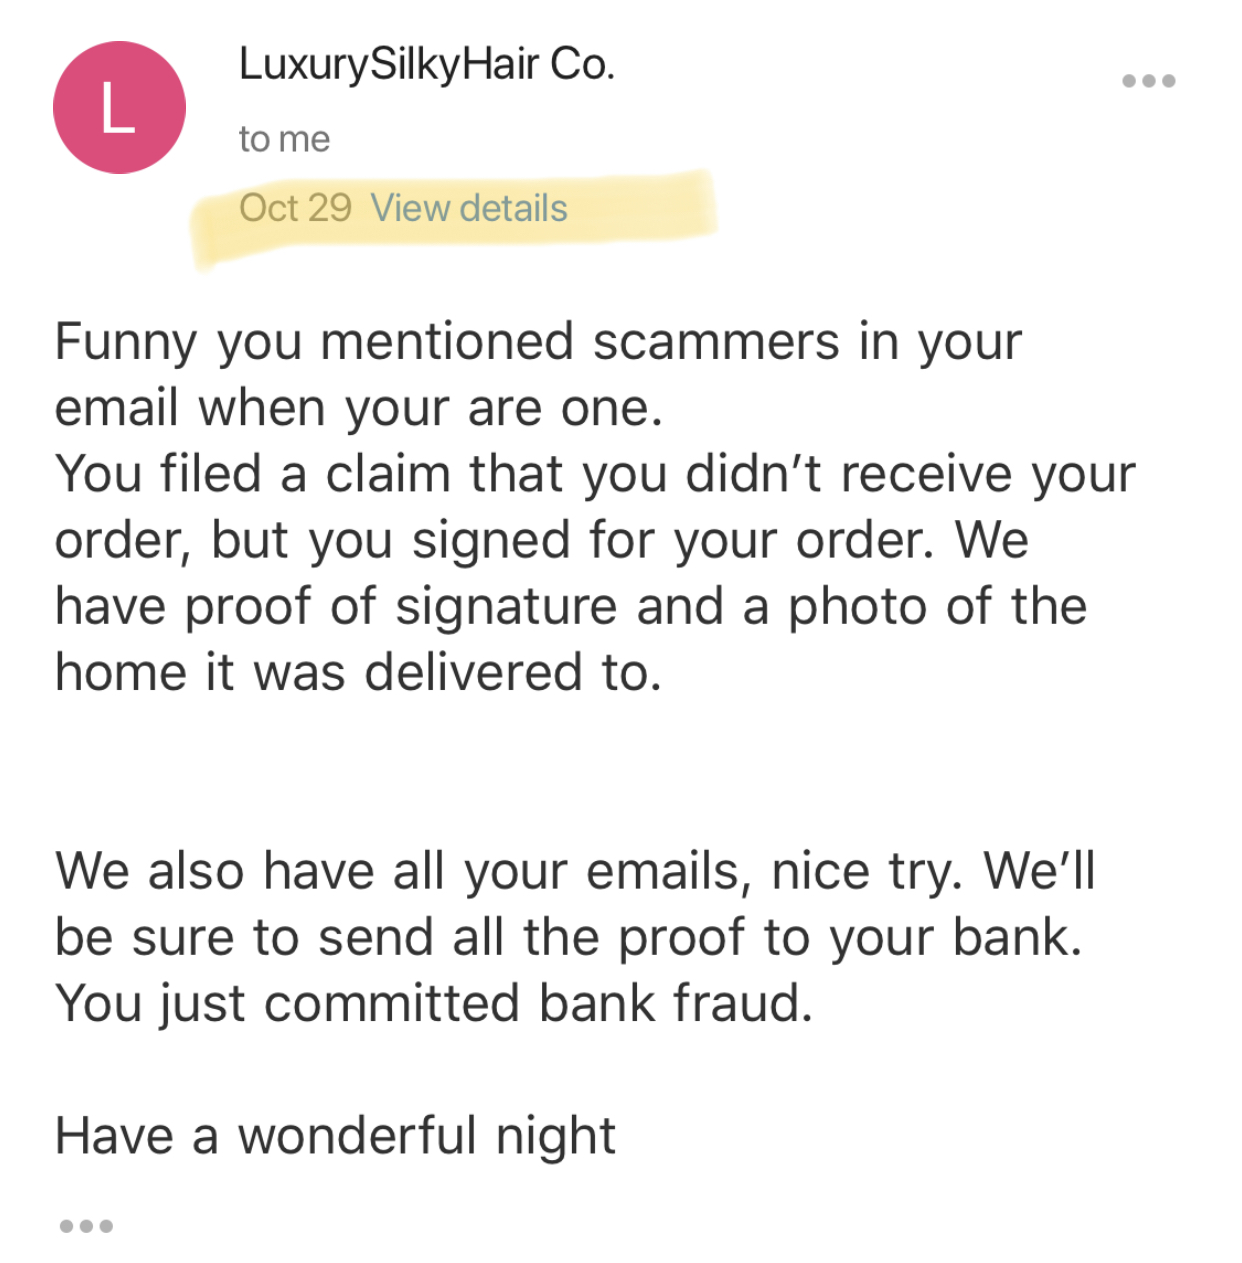 Their NEW email accusing me of bank fraud.